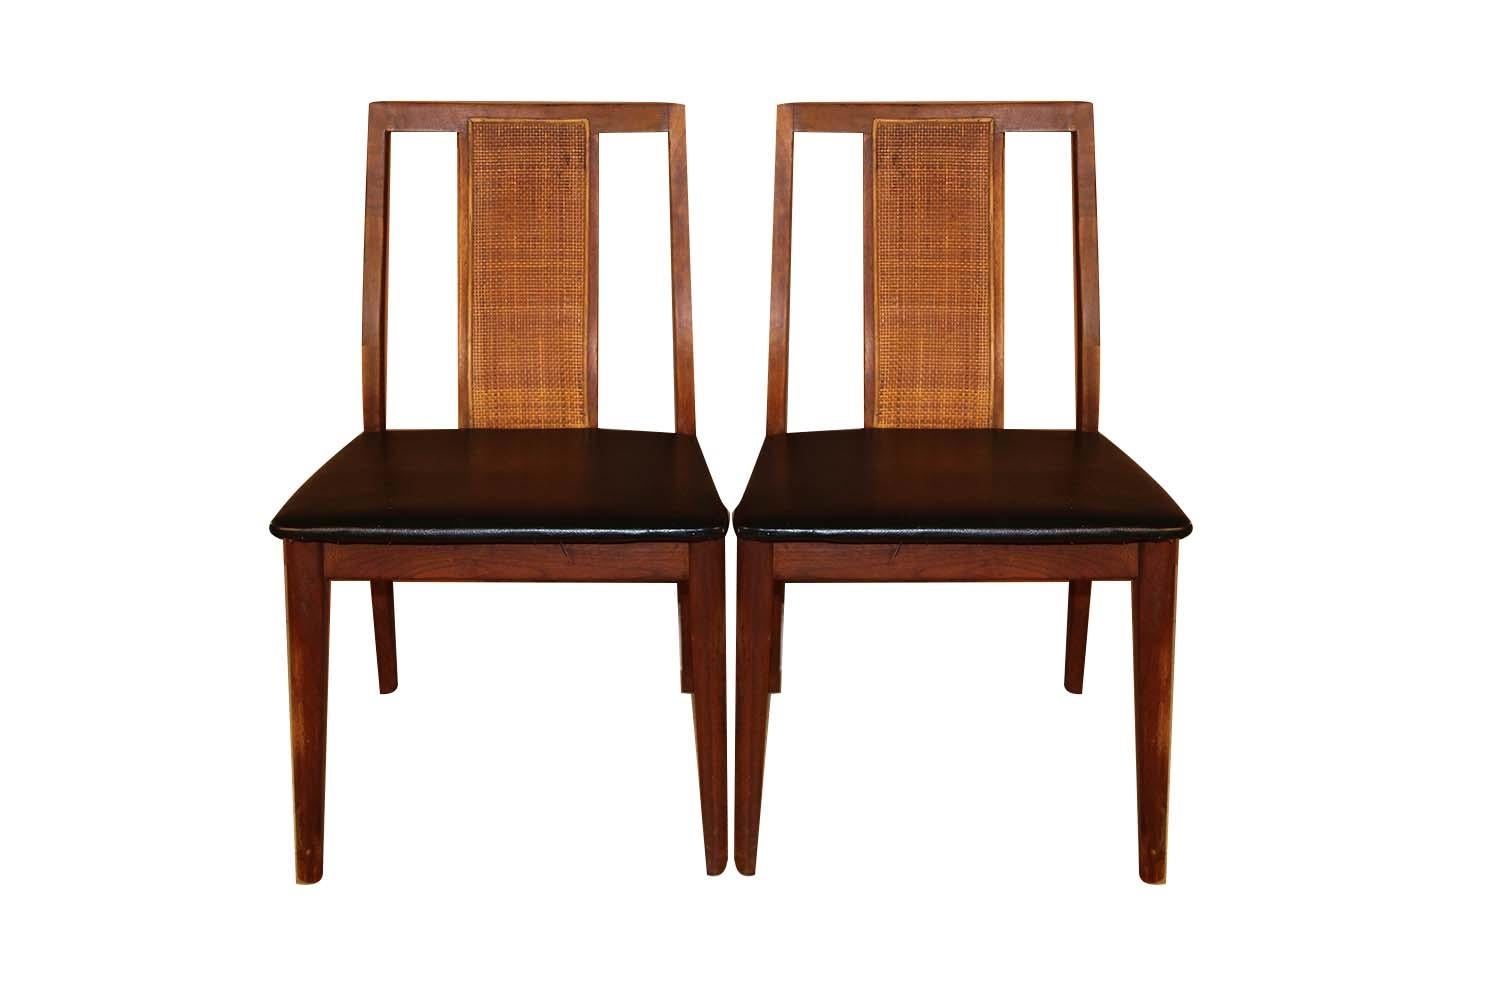 A beautiful pair of Mid-Century Modern chairs in the style of Edward Wormley, manufactured by Hibriten Chair Company of Lenoir NC. This pair features solid walnut frames with black faux leather seats. A Classic minimalistic design with a sleek